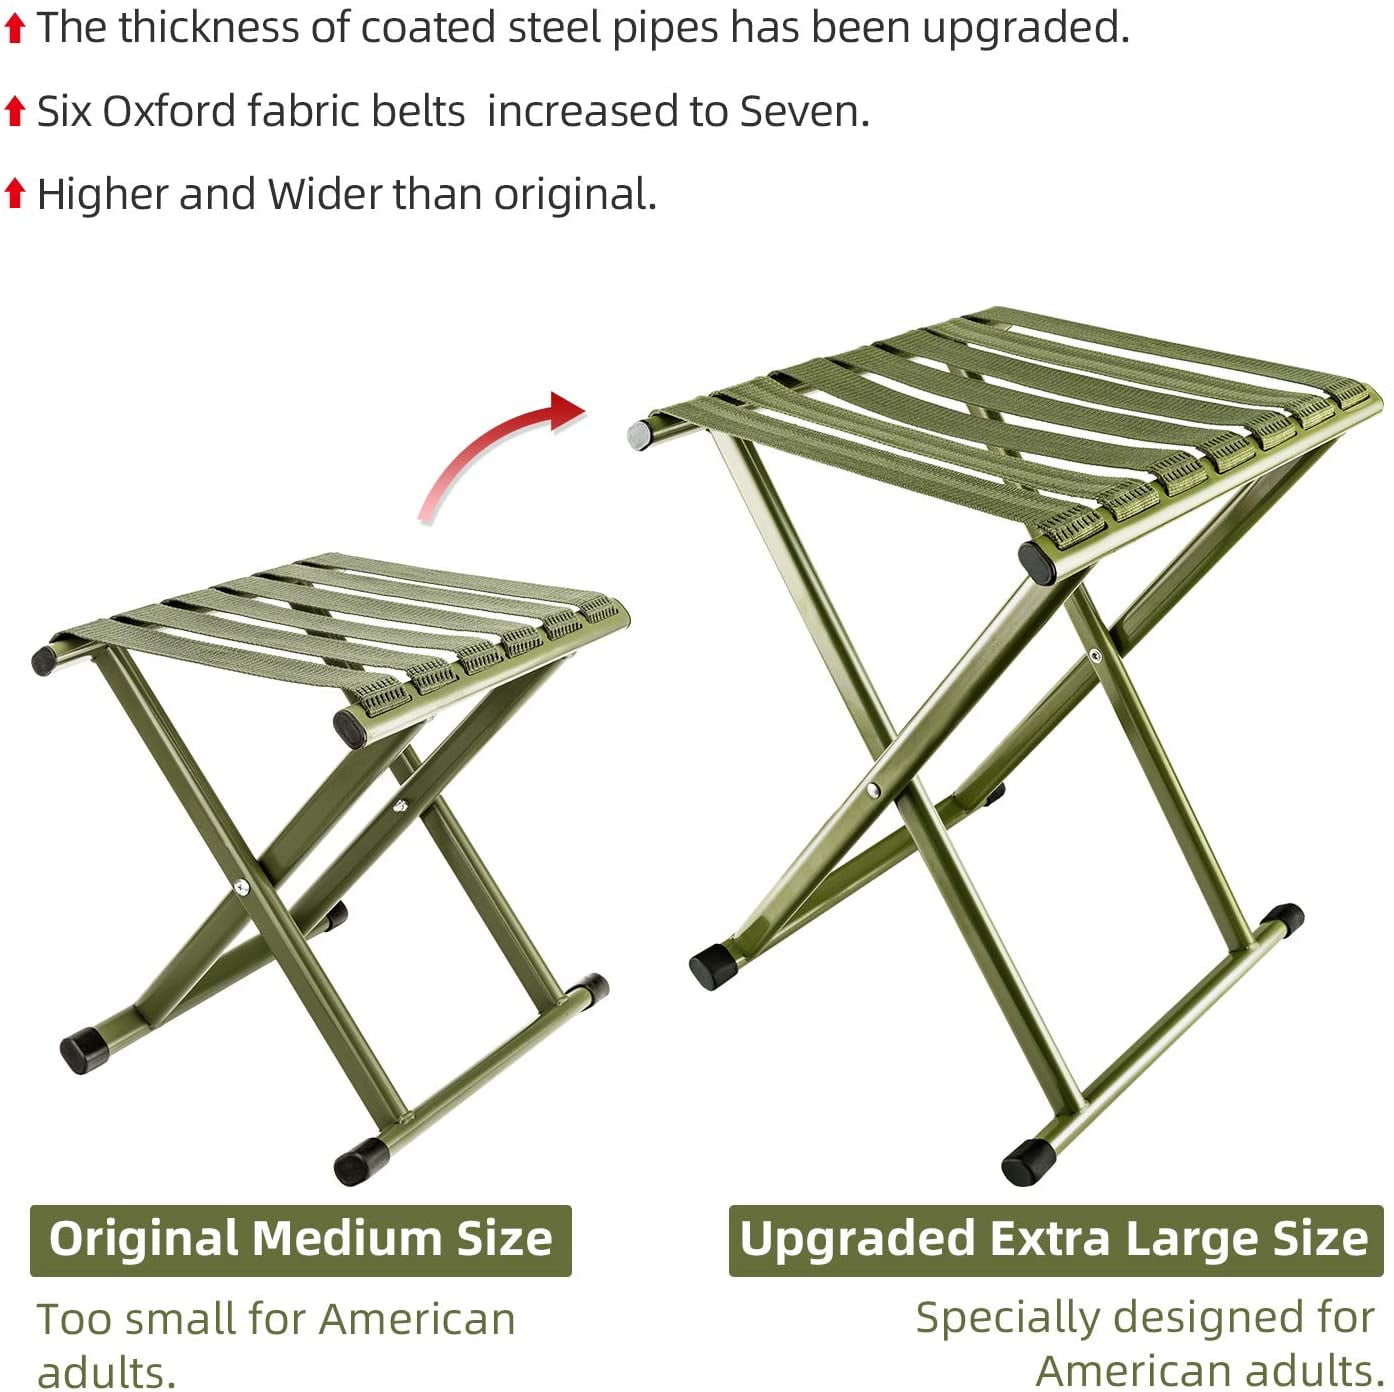 Super Strong Heavy Duty Outdoor Folding Chair Hold up to 600 lbs TRIPLE TREE Portable Folding Stool x14.3 Unfold Size 13.9 Inch Pack of Two W H Large L x17.8